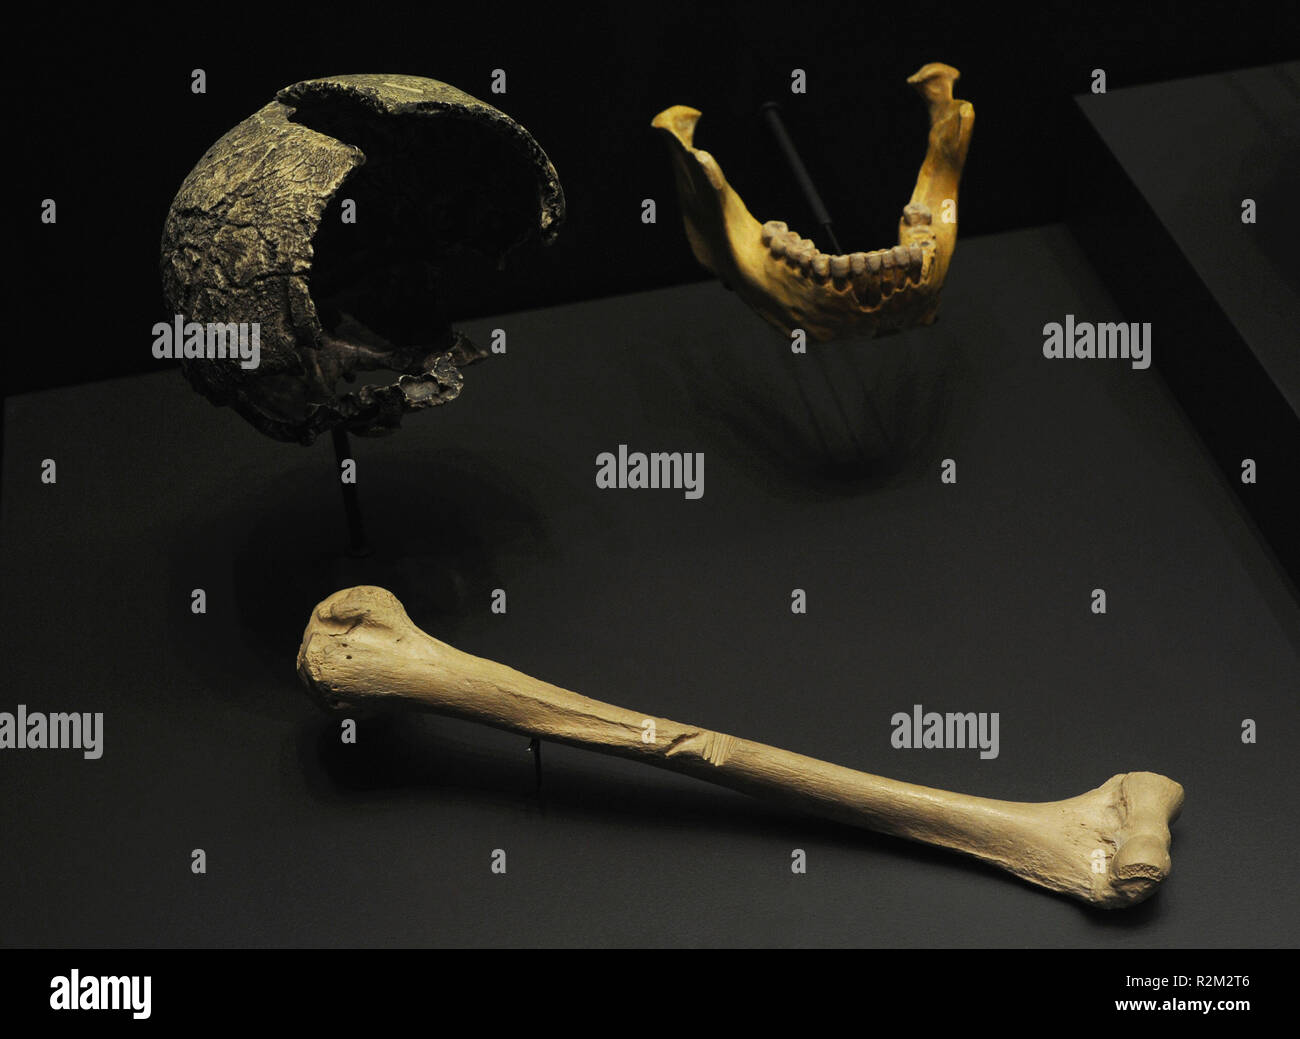 Homo heidelbergensis. Fragment of a cranium, 250000 years ago (Swanscombe, Great Britain). Adult mandible, 500000 years ago (Mauer, Germany) and Humerus, 240000 years ago (Lezetxiki, Mondragon, Basque Country, Spain). Replicas. National Archaeological Museum. Madrid. Spain. Stock Photo